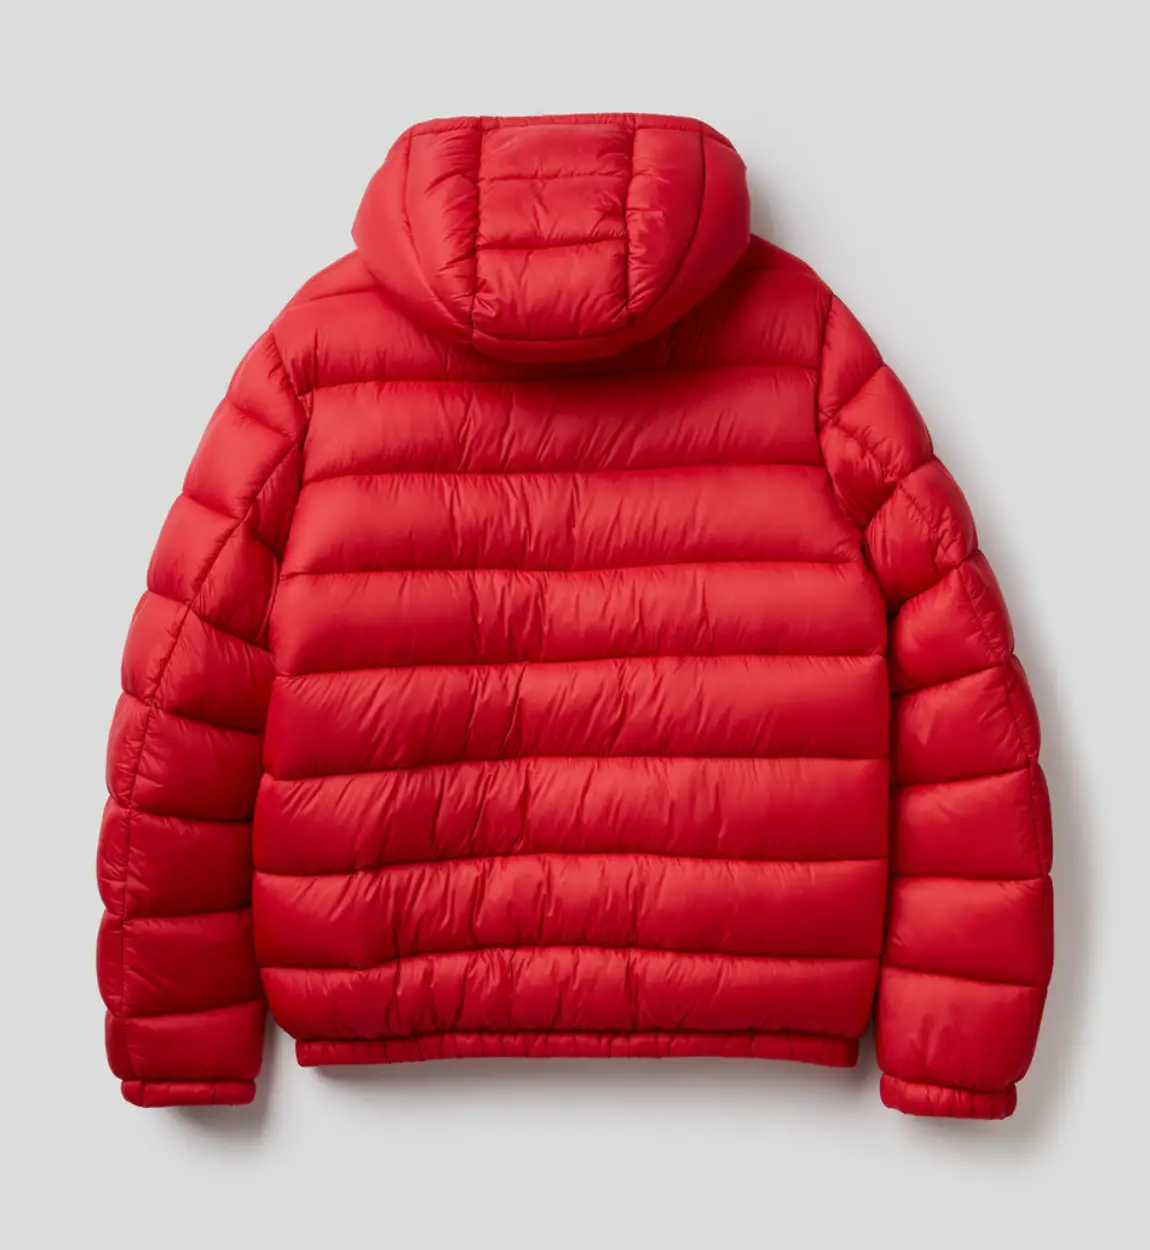 Red_Puffer_Jacket_Tendon_Sports (3)